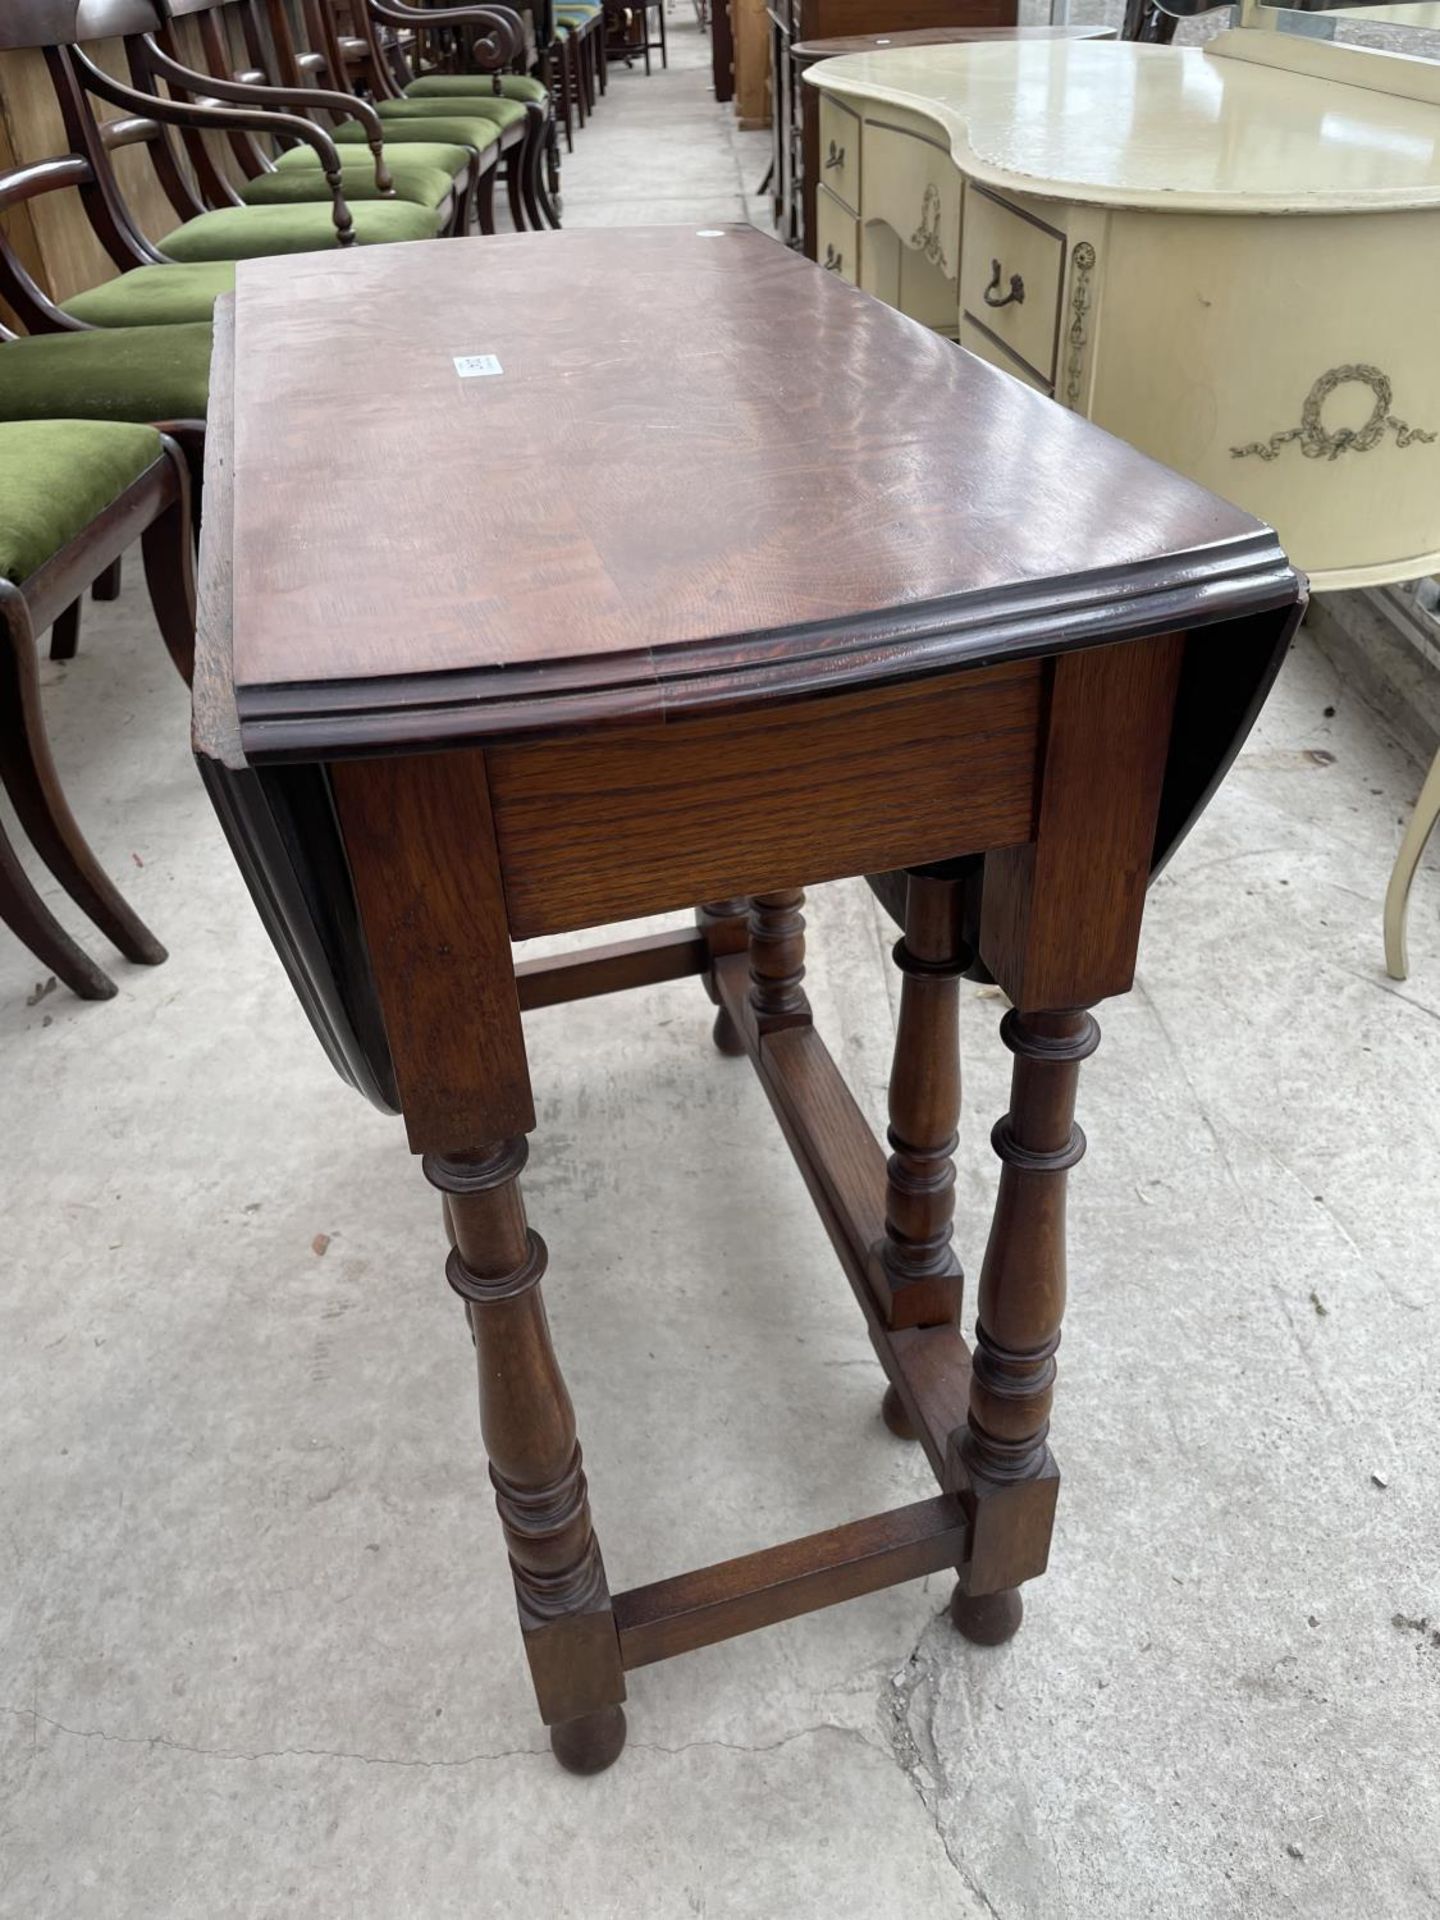 AN EARLY 20TH CENTURY OVAL OAK DINING TABLE ON TURNED LEGS, 30X42" - Image 4 of 5